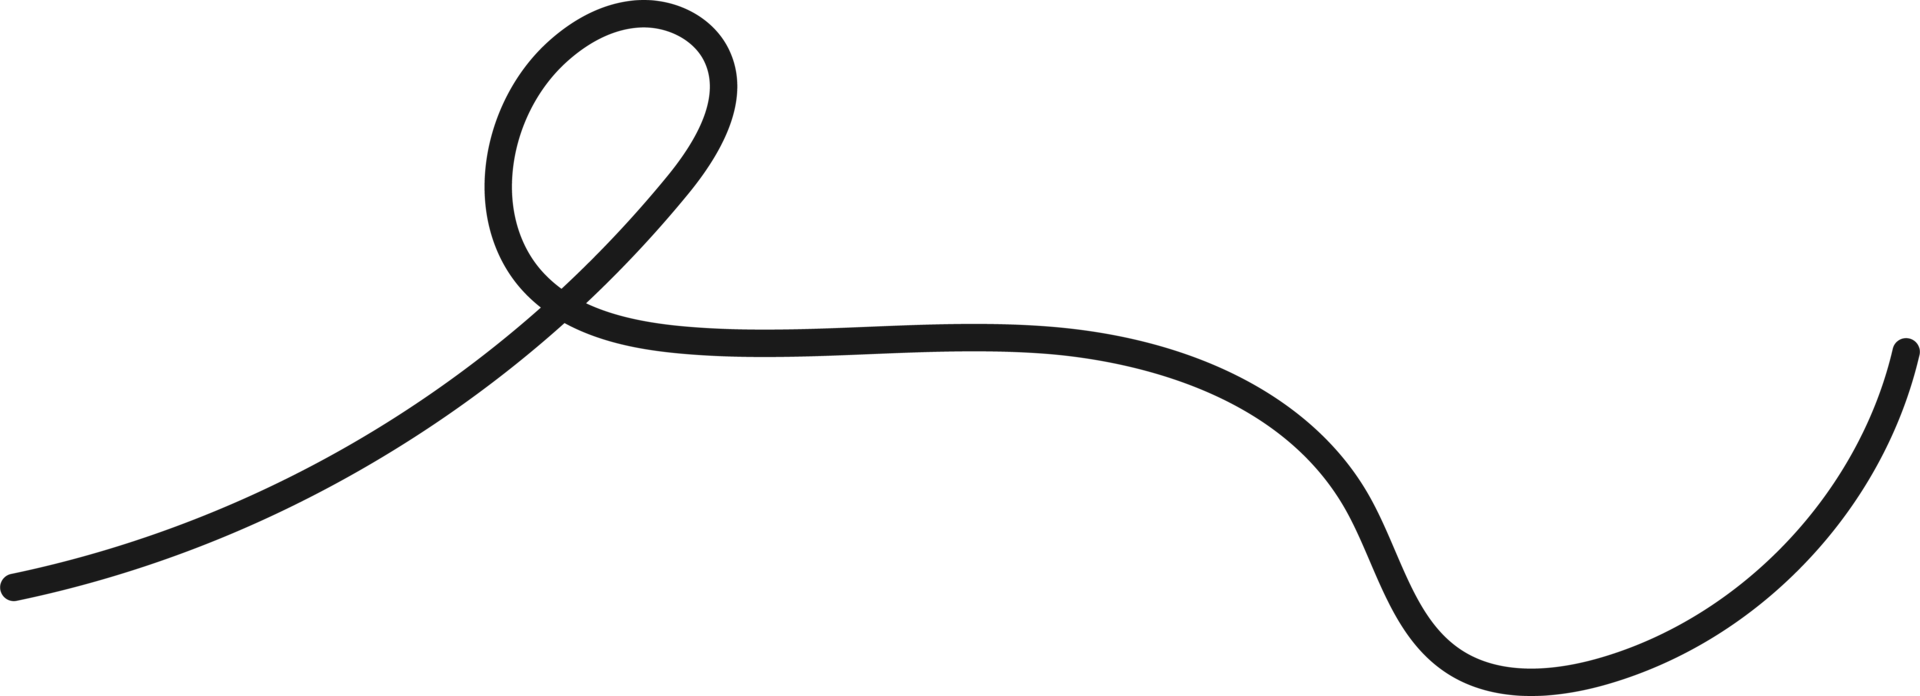 Curve Line PNG Free Image